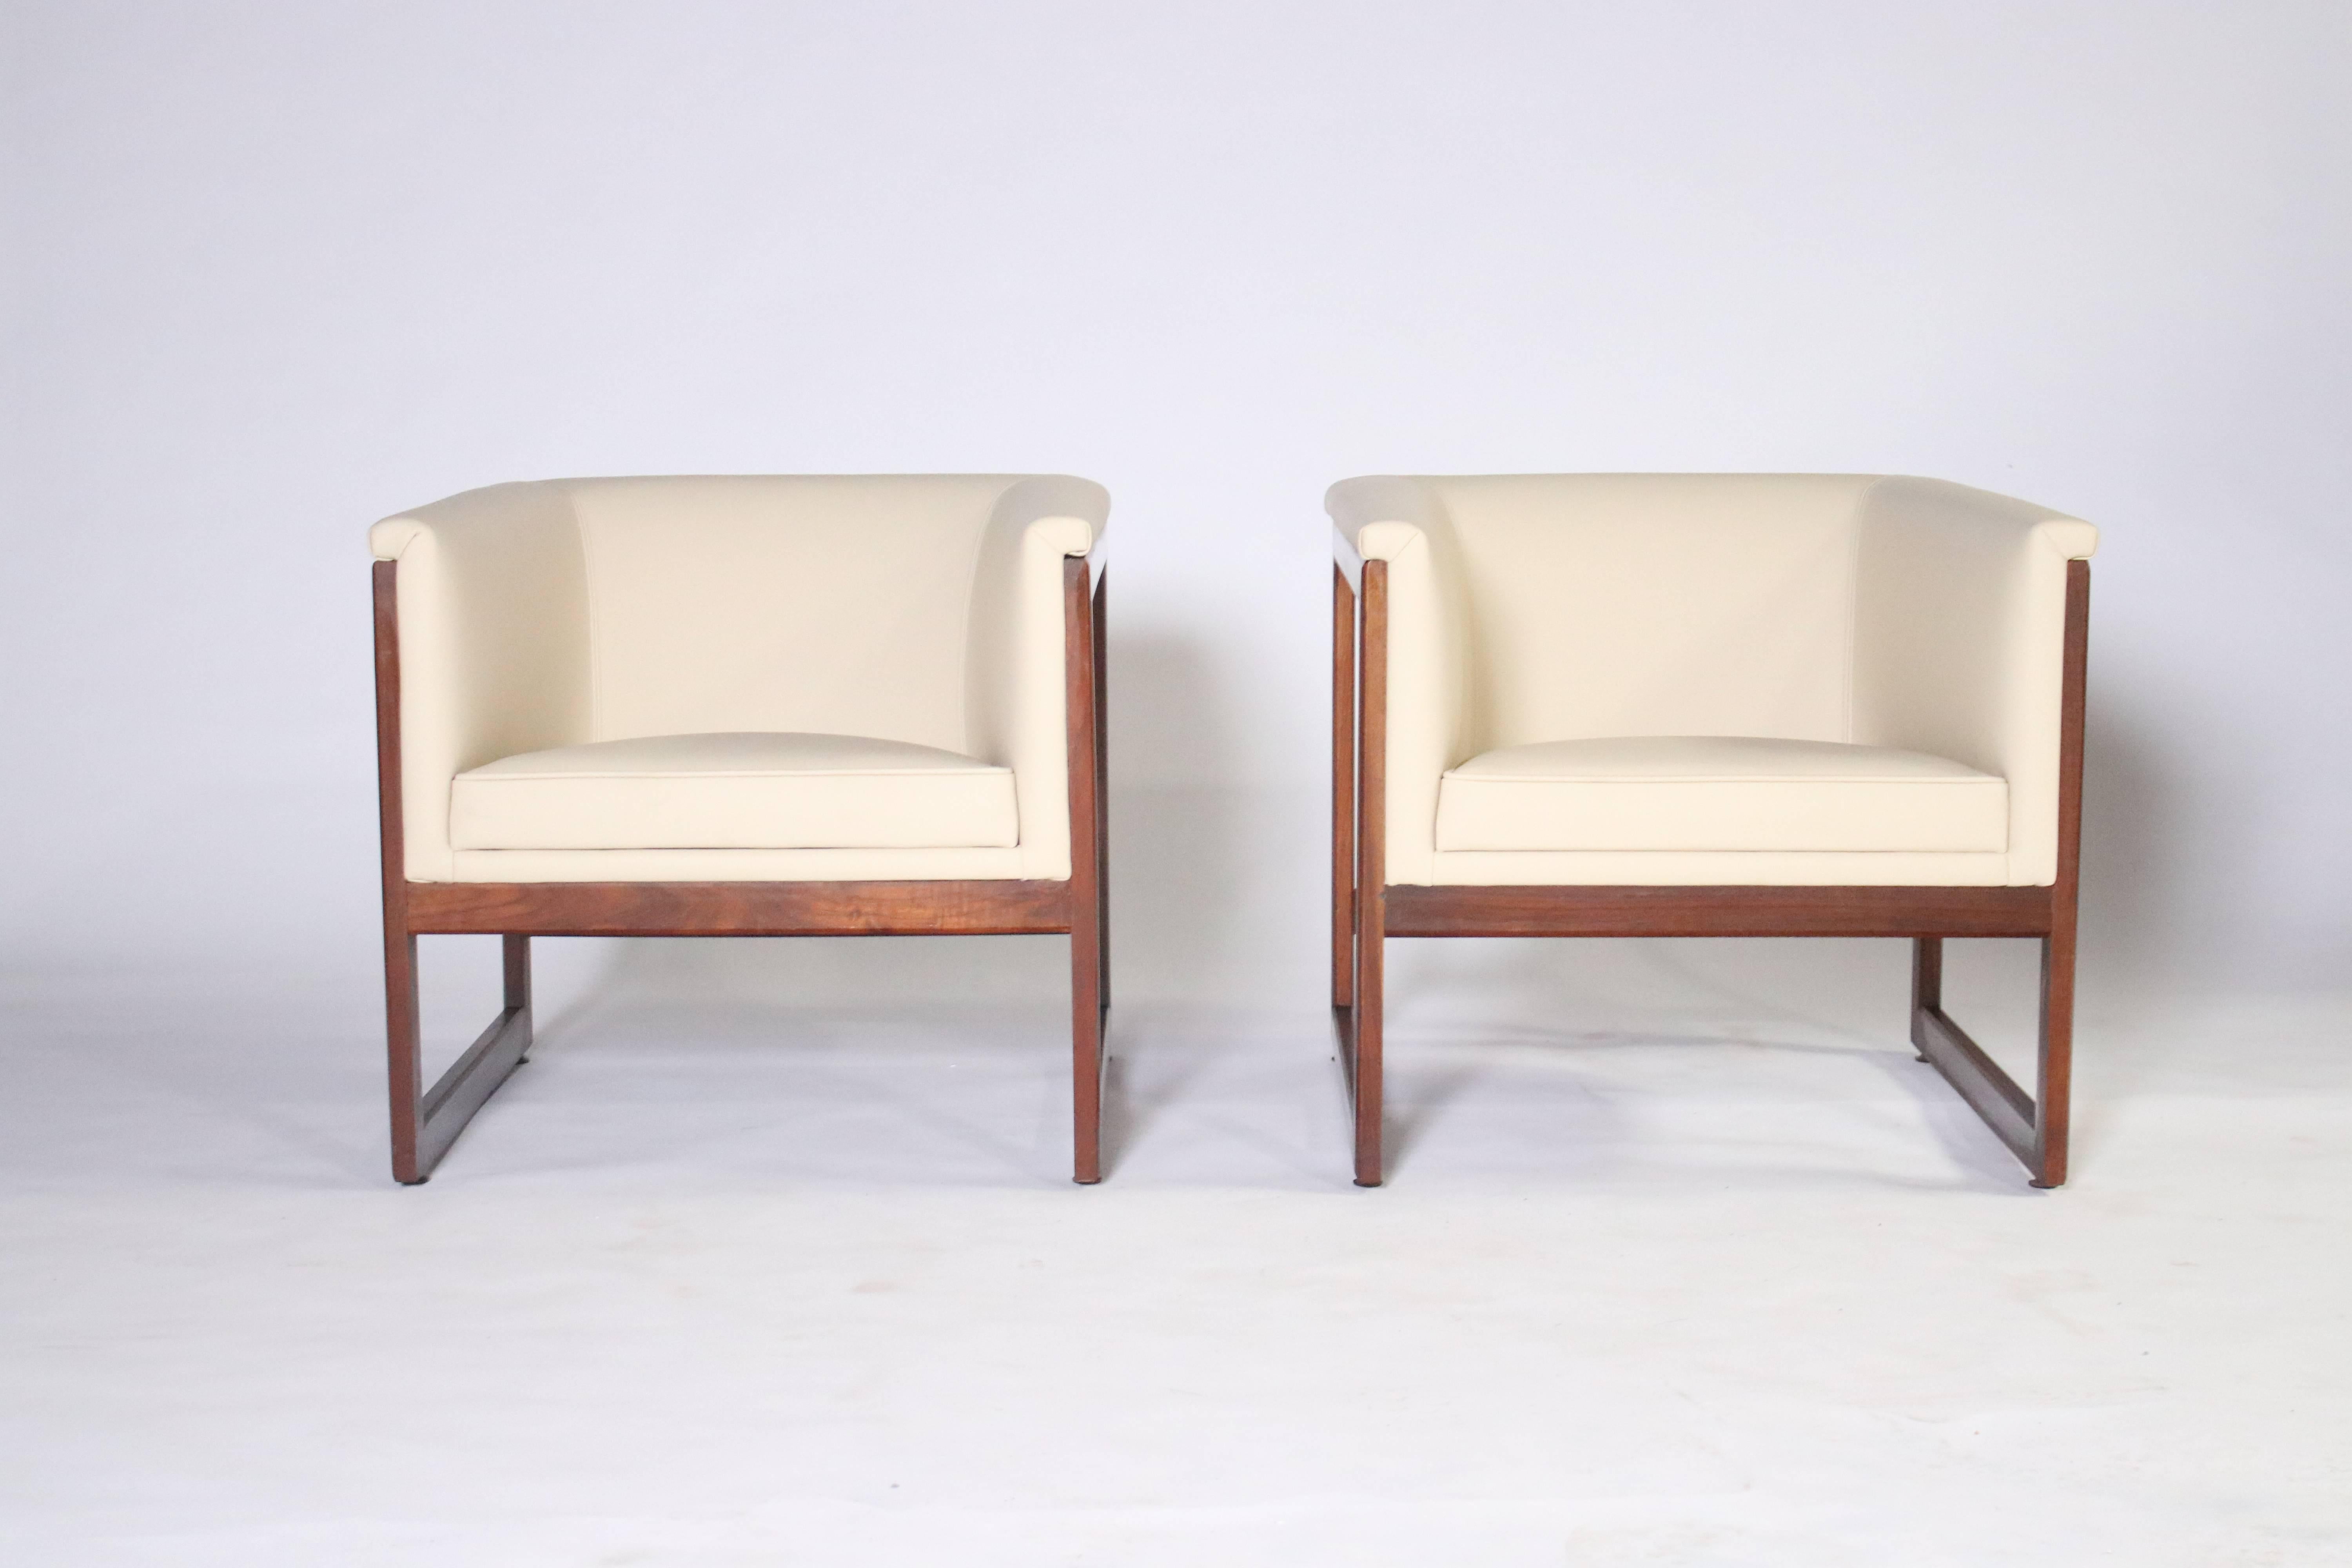 Pair of 1960s Milo Baughman floating or cantilevered cube shaped club chairs with solid walnut frames, newly upholstered in bone color leather.